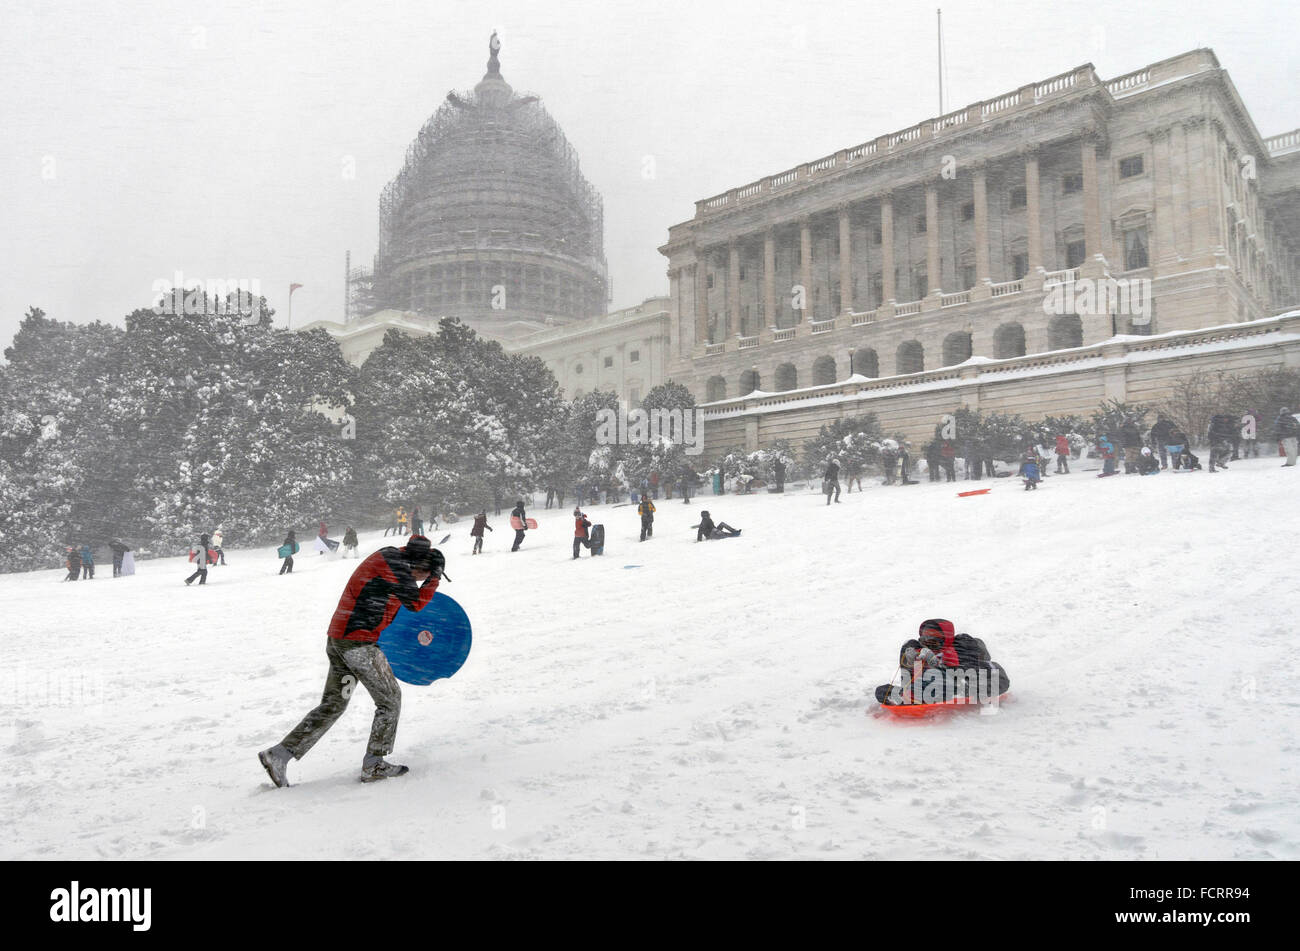 Washington DC, USA. 23rd January, 2016. Residents take advantage Winter Storm Jonas to ride snow sleds down the slope on Capitol Hill January 23, 2016 in Washington, DC. This was the first time it was legal to use the hill for sledding after Congress passed a bill allowing resident access to the grounds in snow. Stock Photo